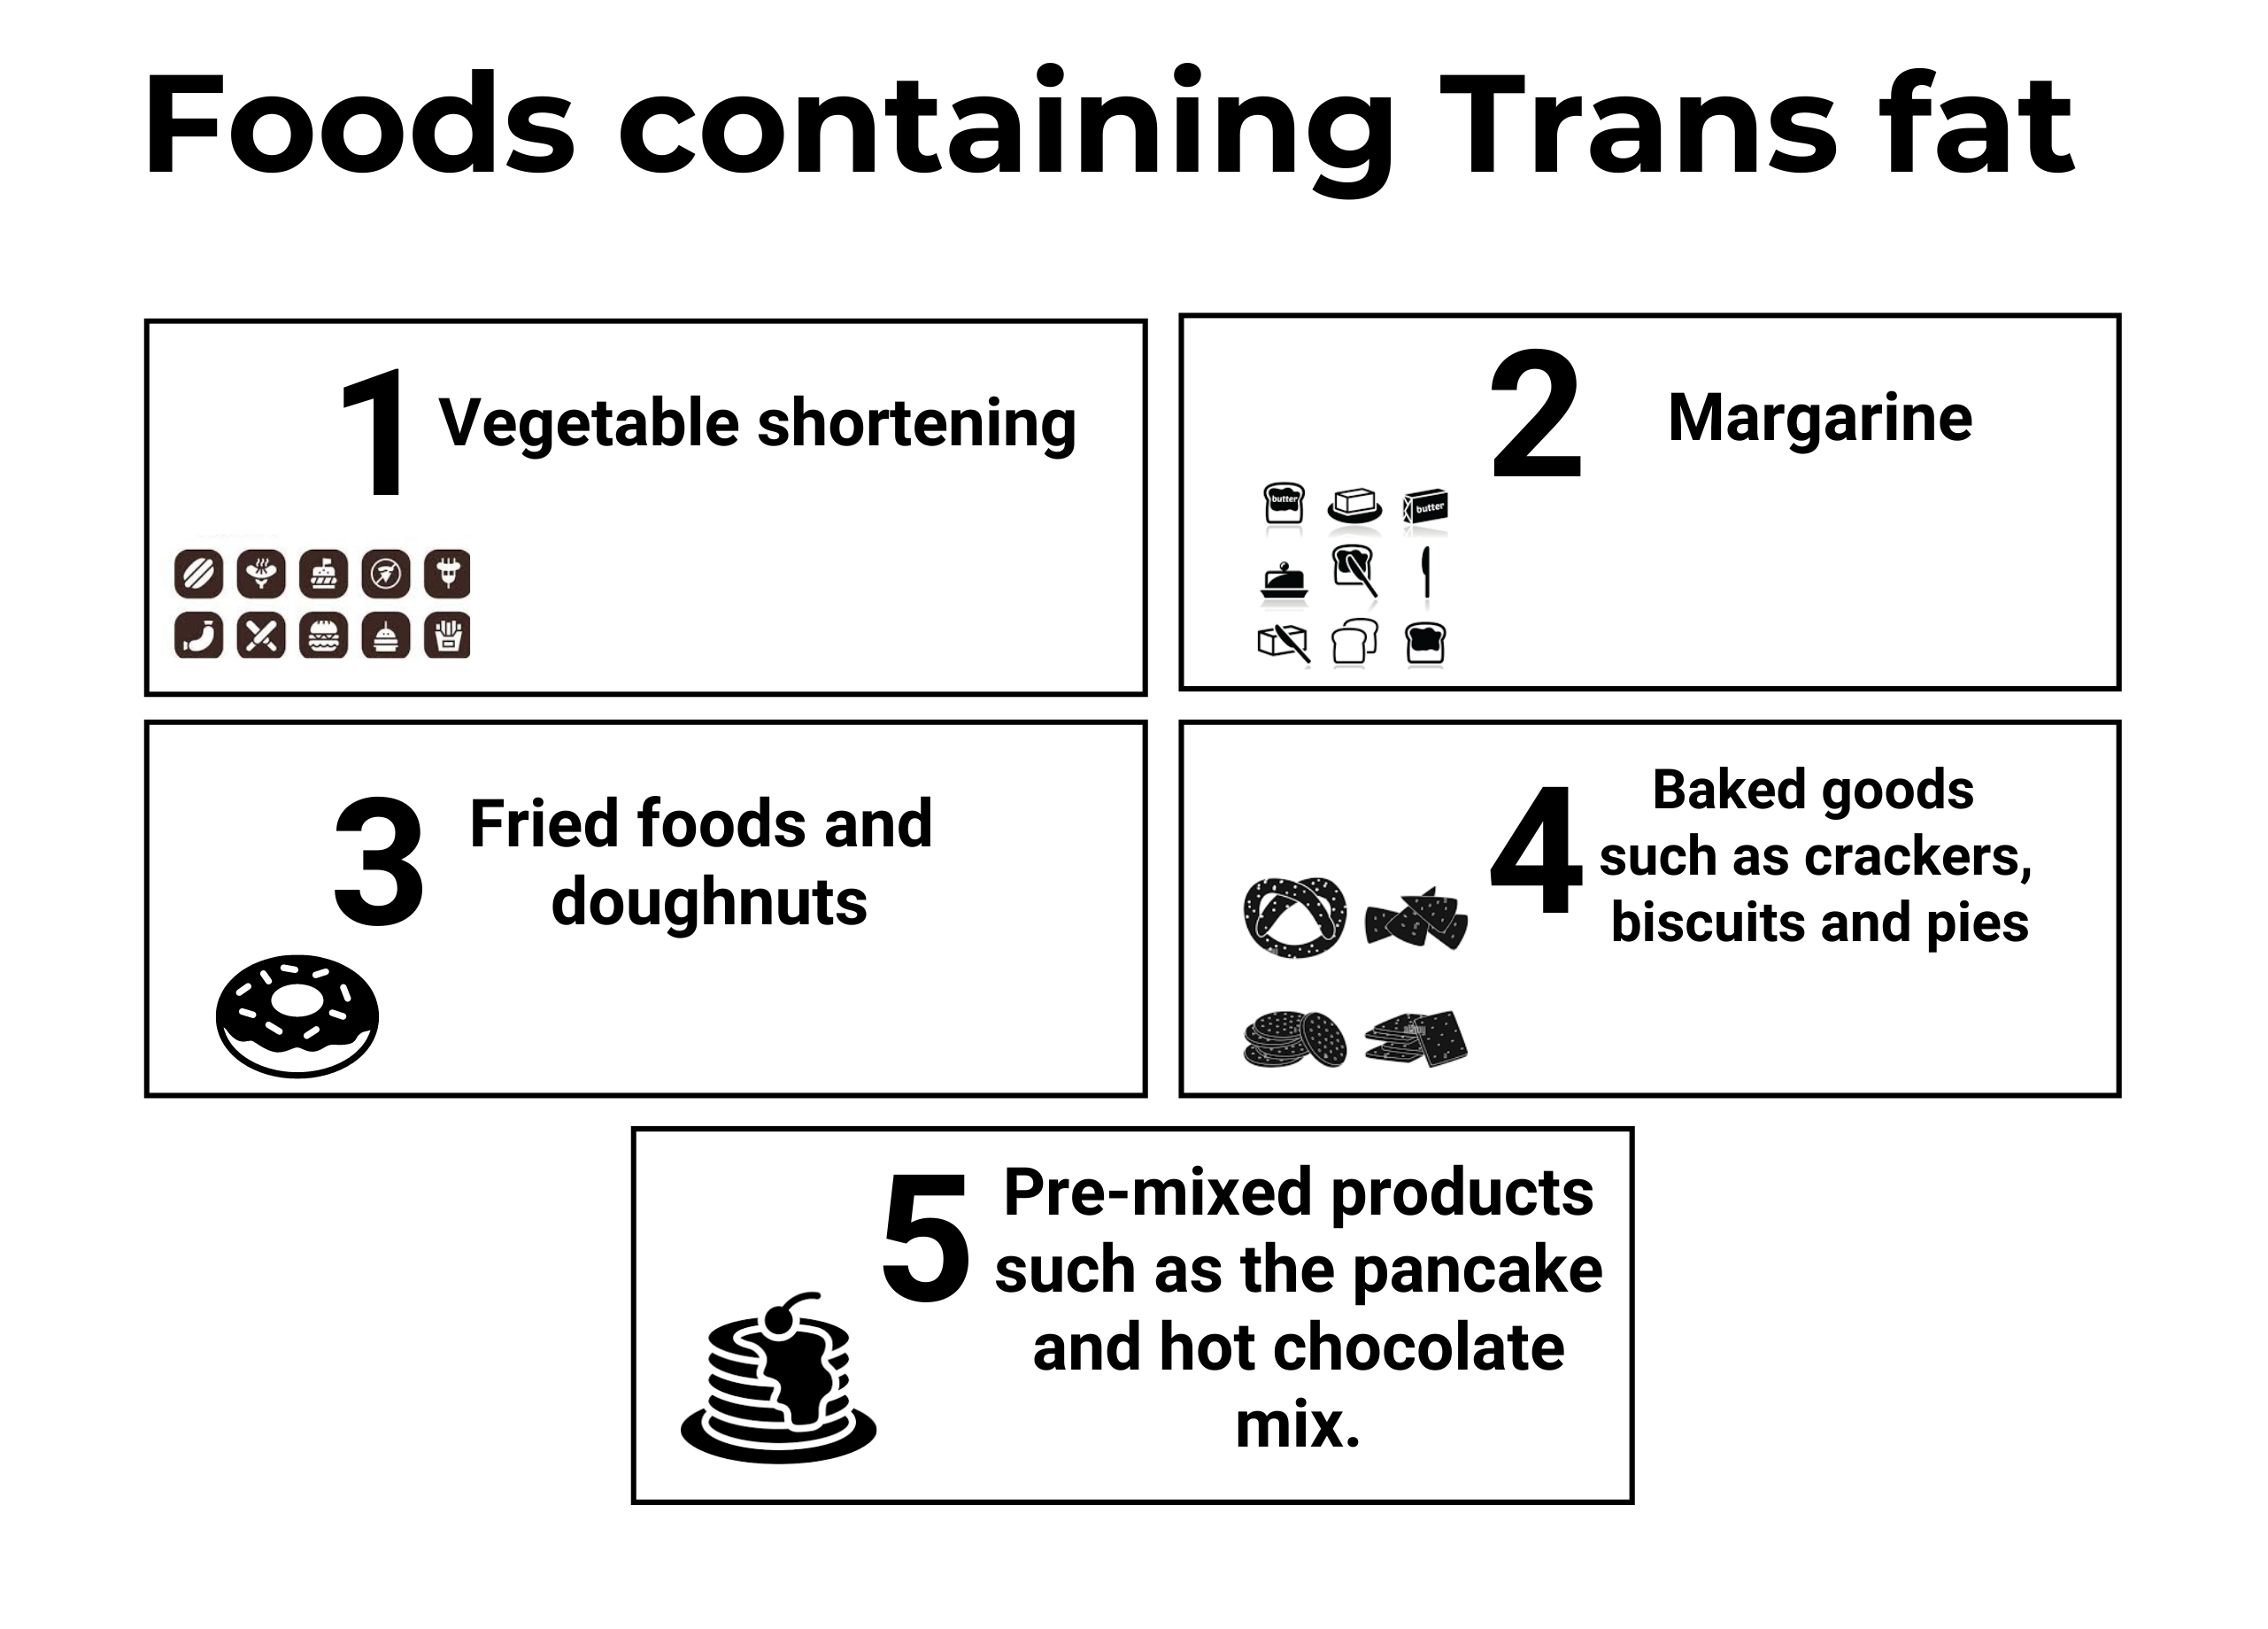 Foods containing Transfat